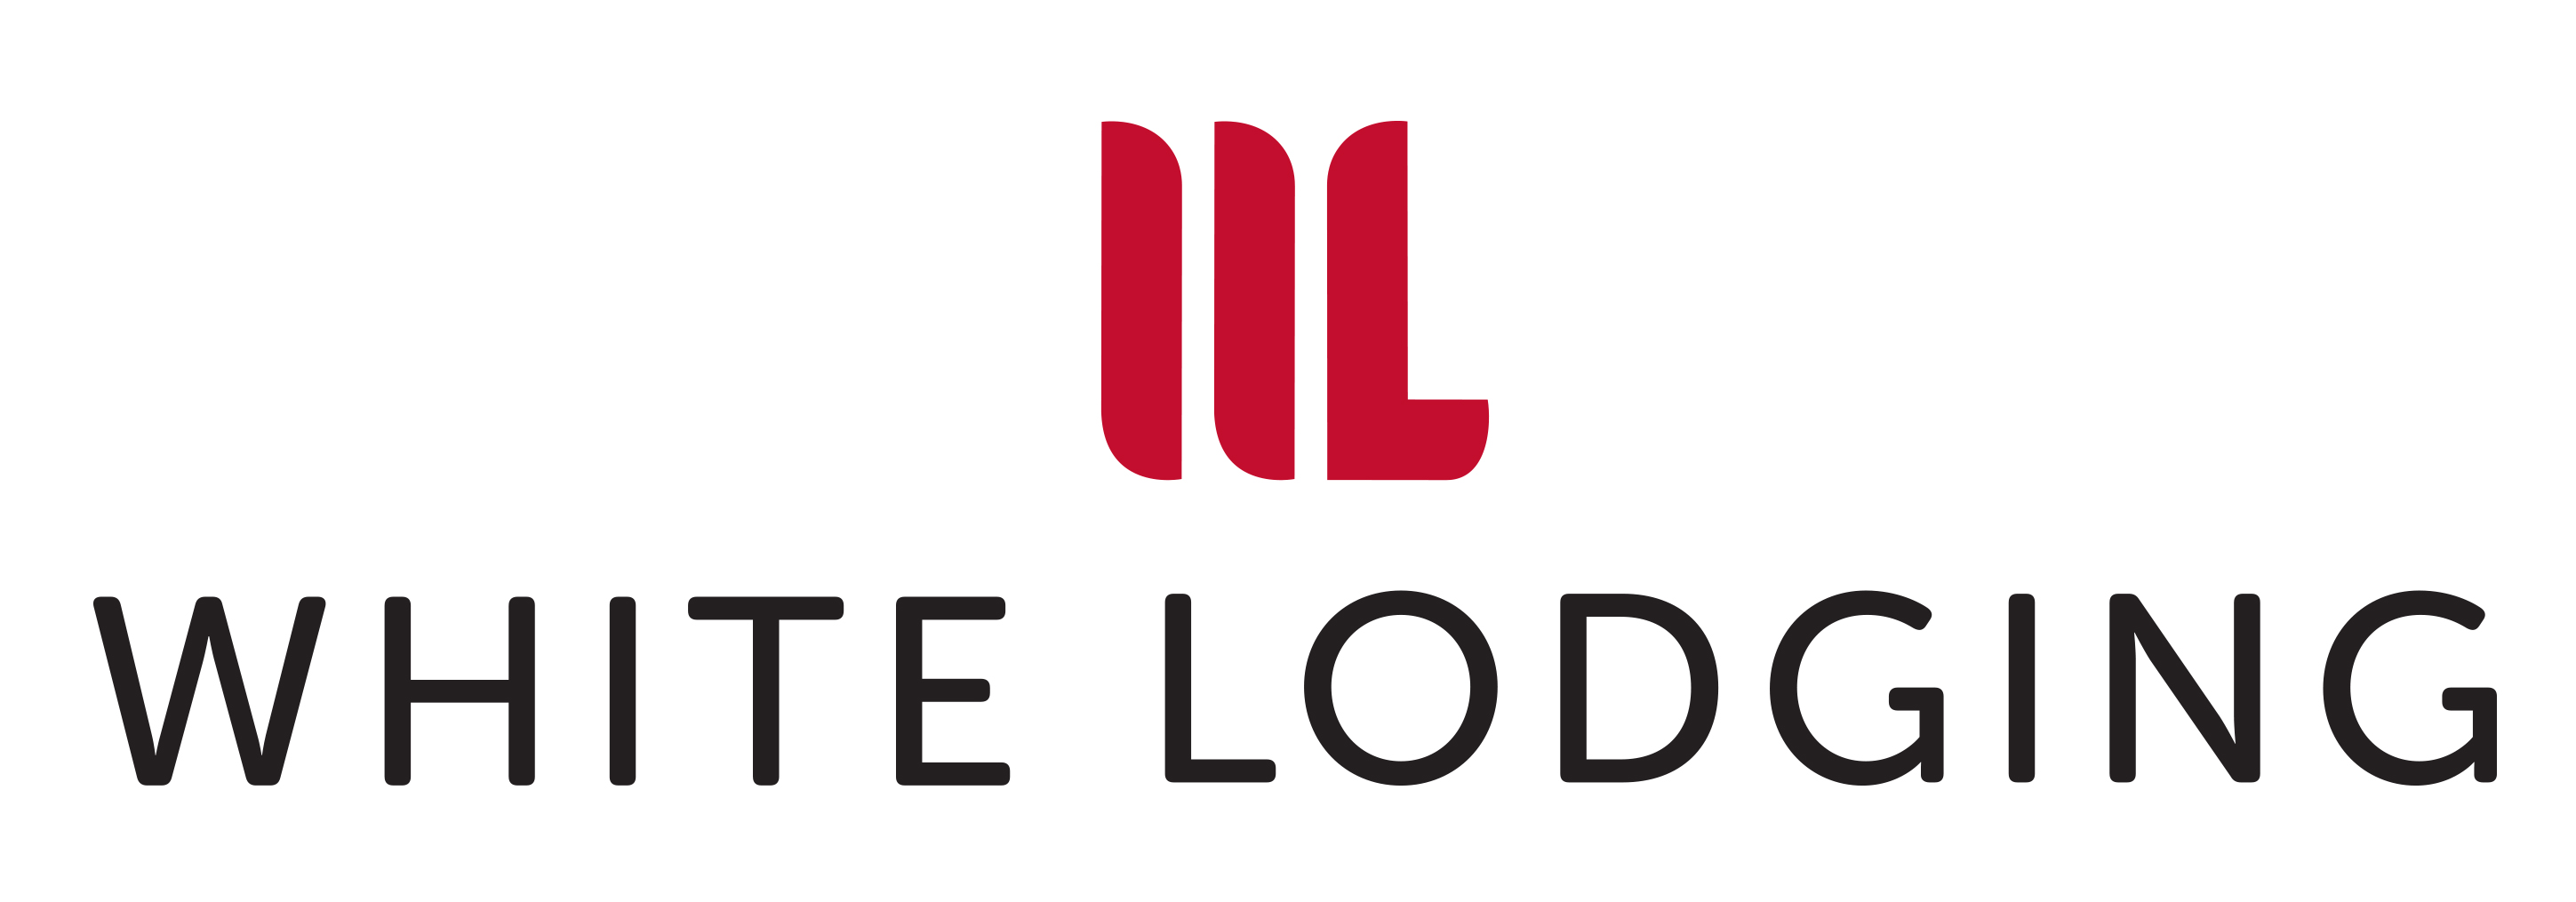 Logo for White Lodging Services